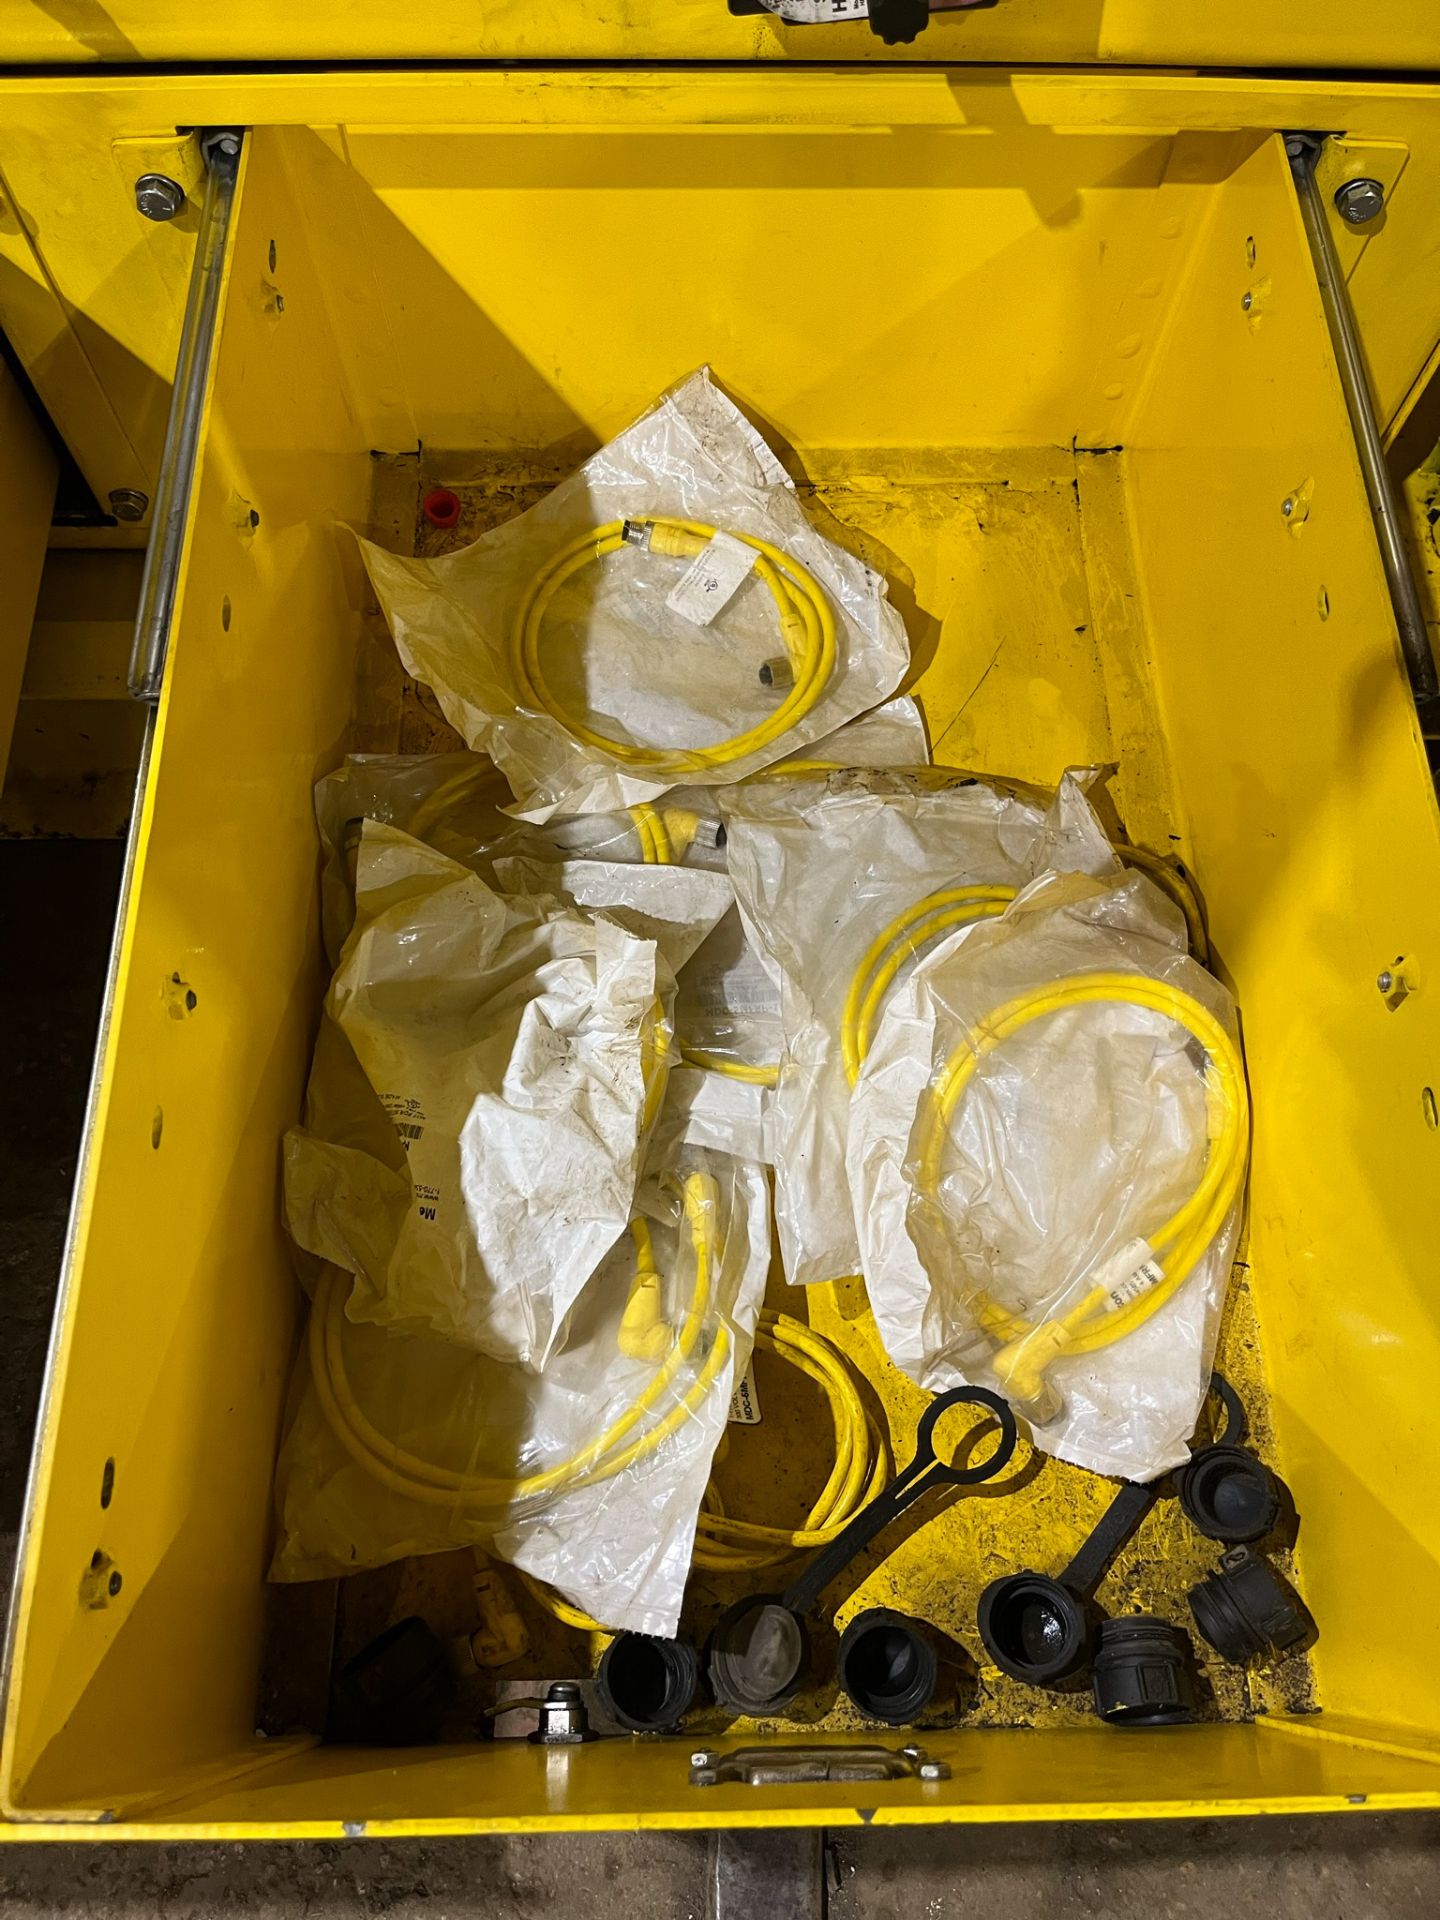 ENERPAC SYNCHRONOUS HOIST SYSTEM WITH STORAGE/SHIPPING CADDY; (4) 100 TON CAPACITY CYLINDERS - Image 18 of 46